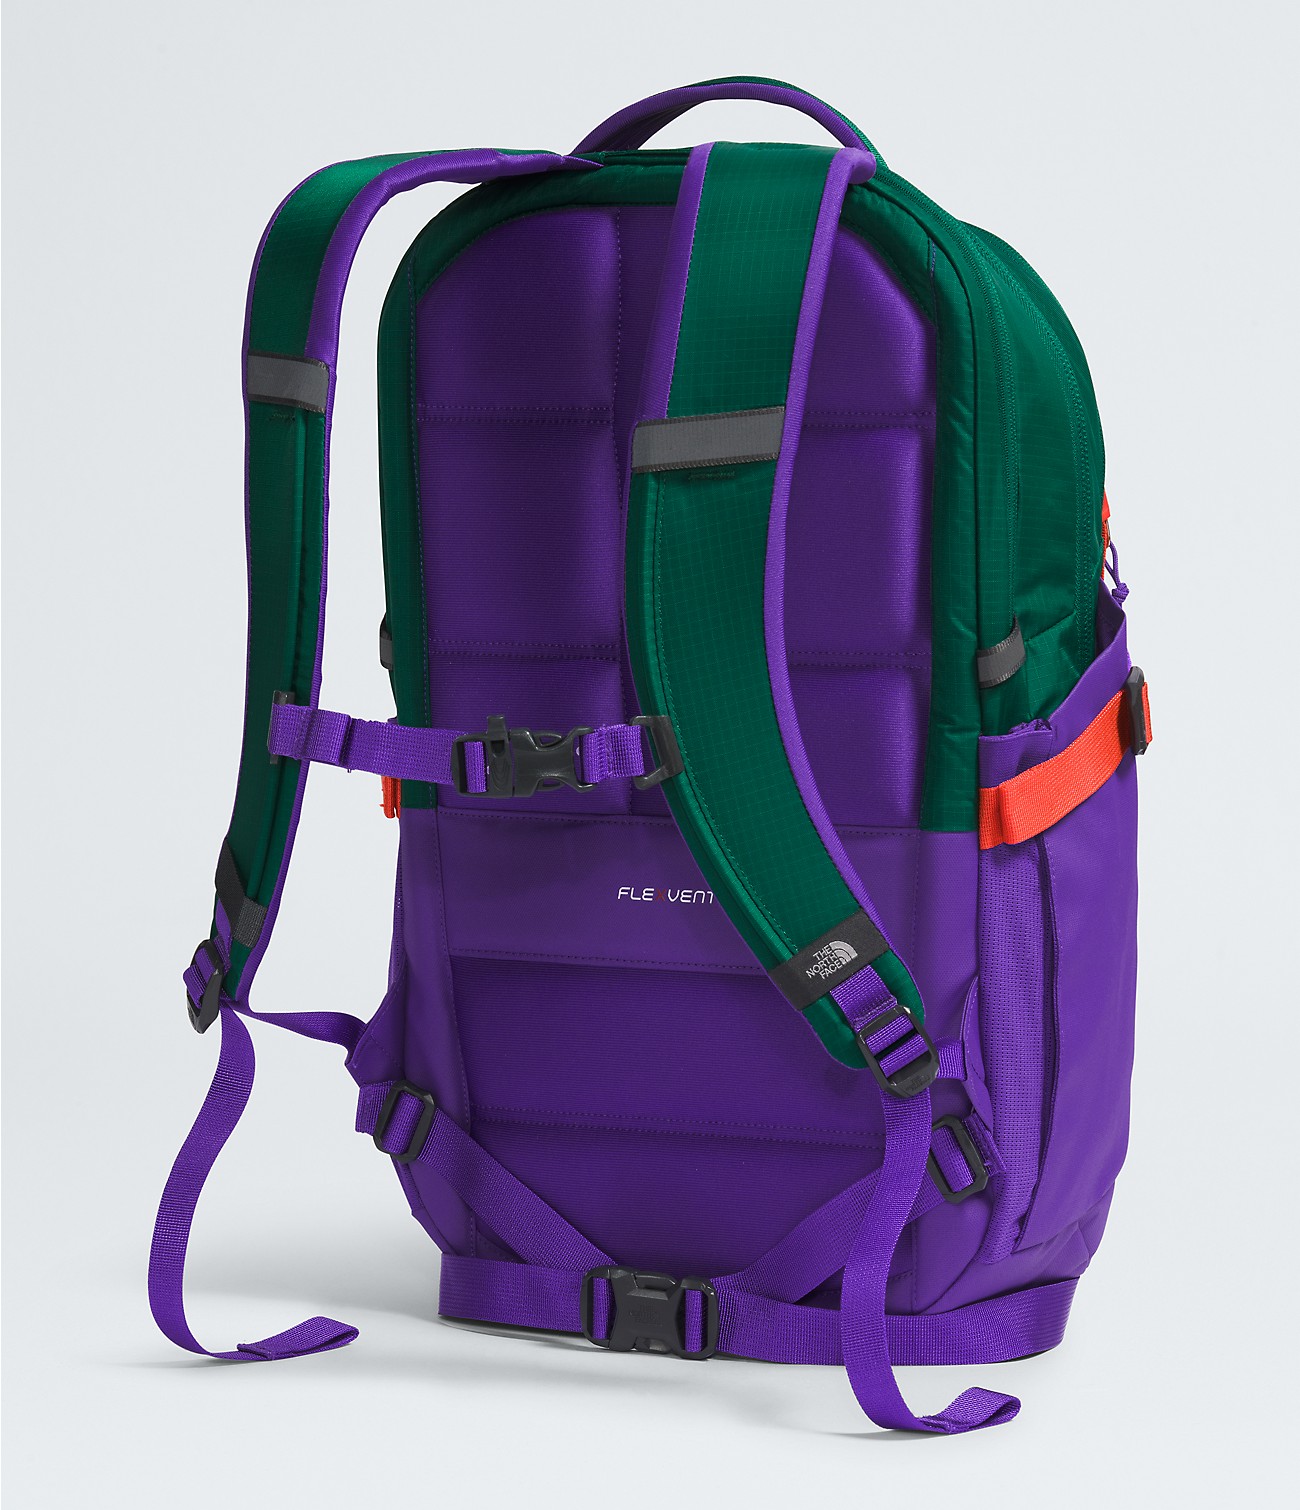 Recon Backpack | The North Face